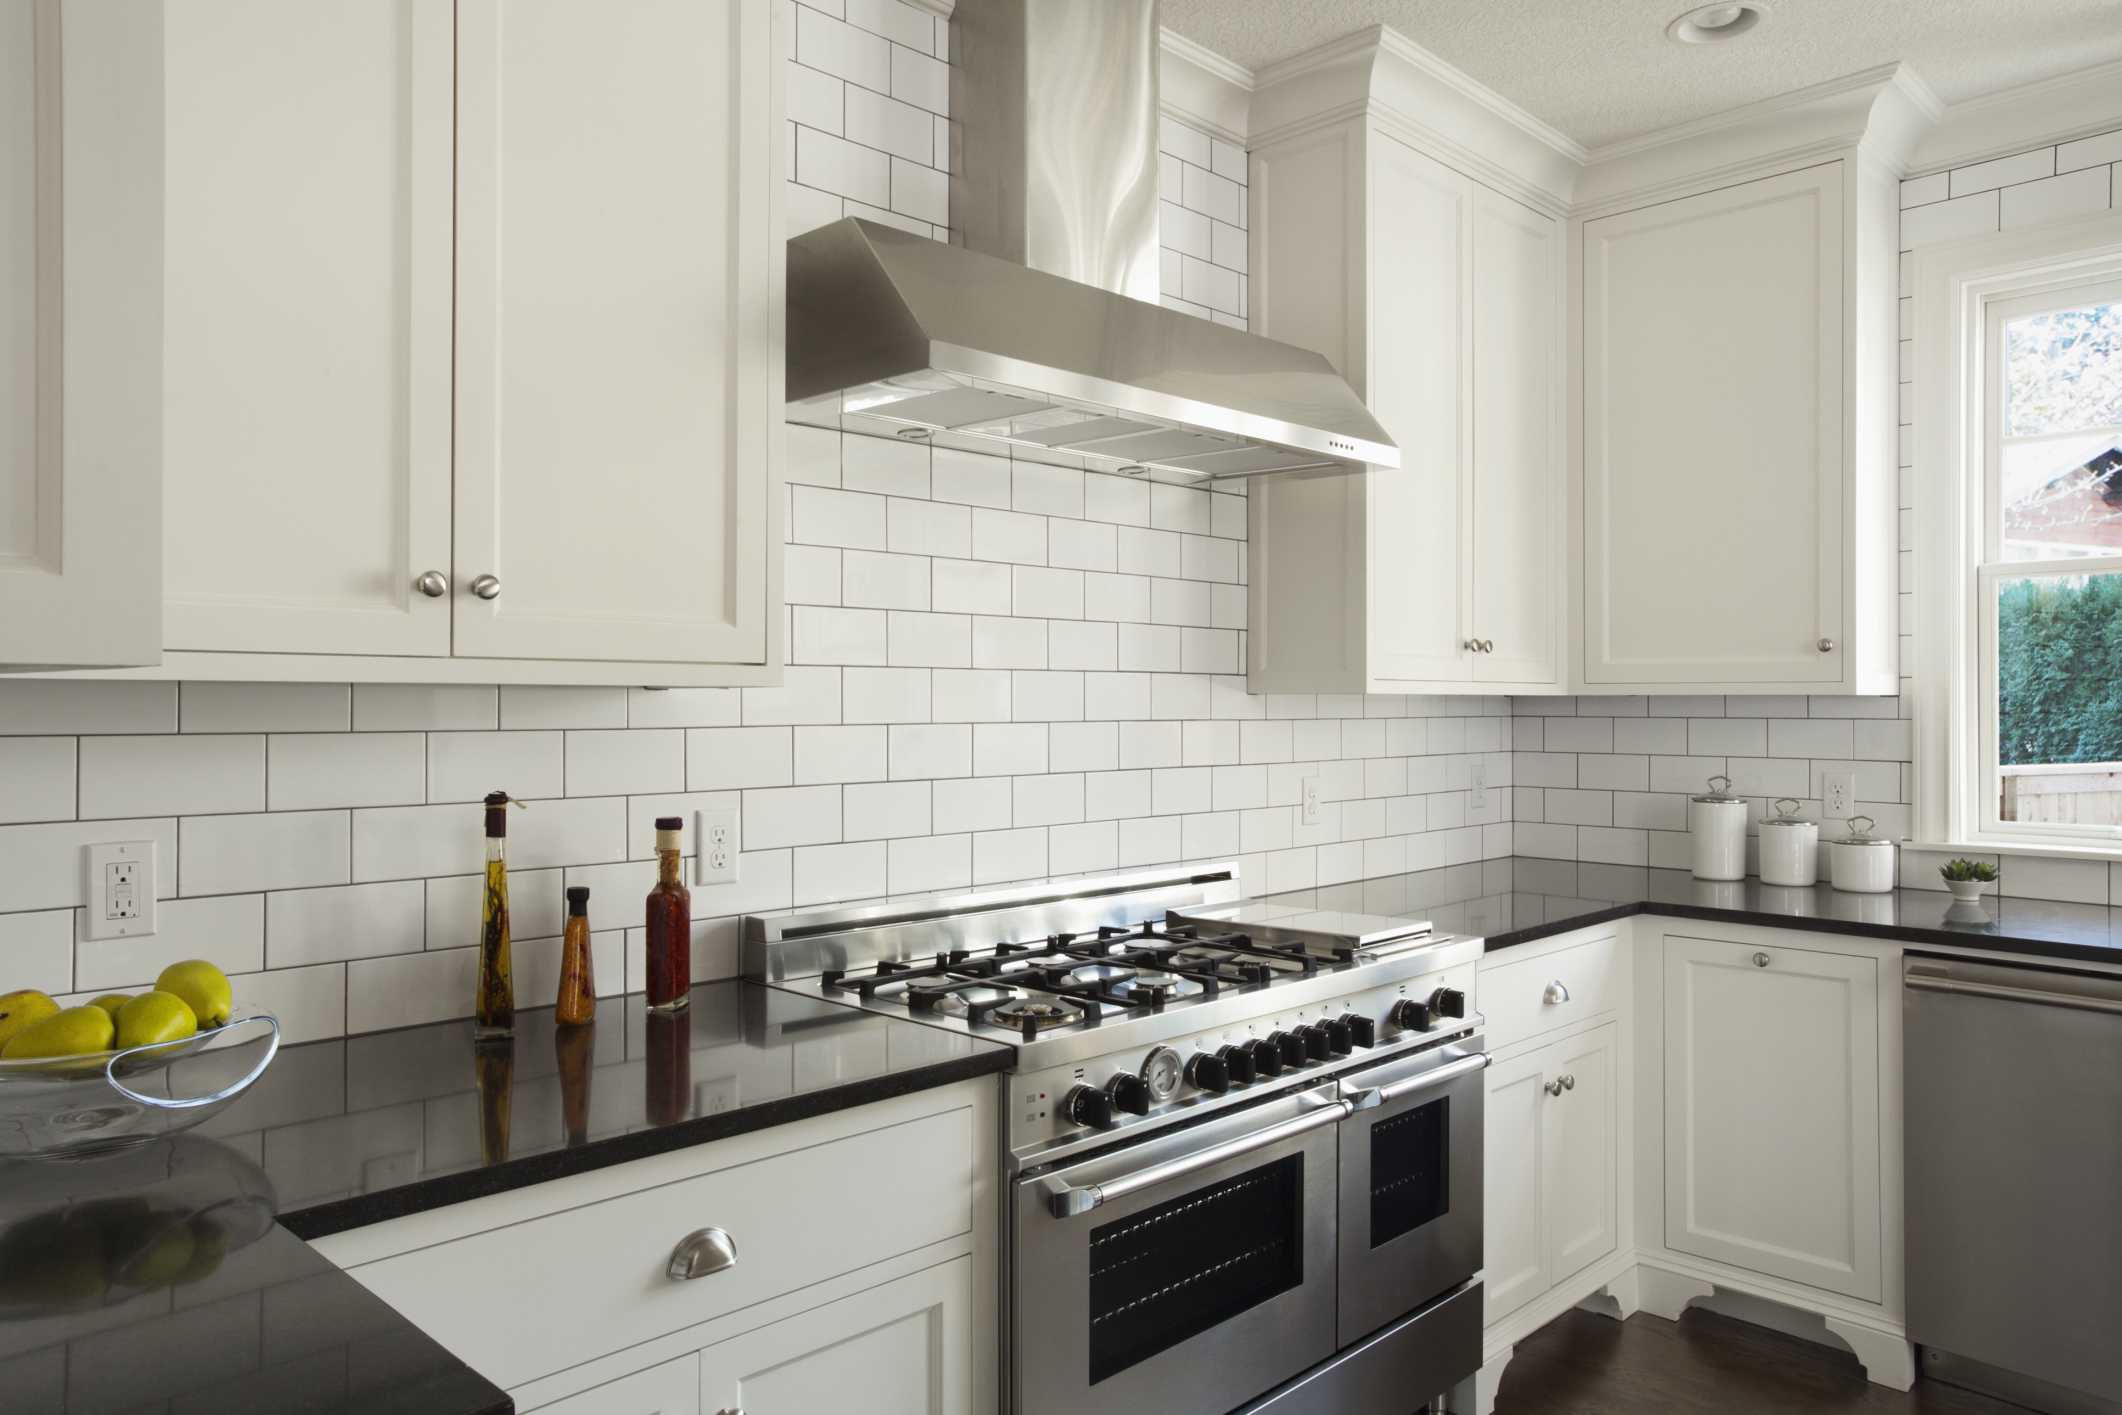 Kitchen Ideas with White Brick Backsplash Inspirational How Subway Tile Can Effectively Work In Modern Rooms